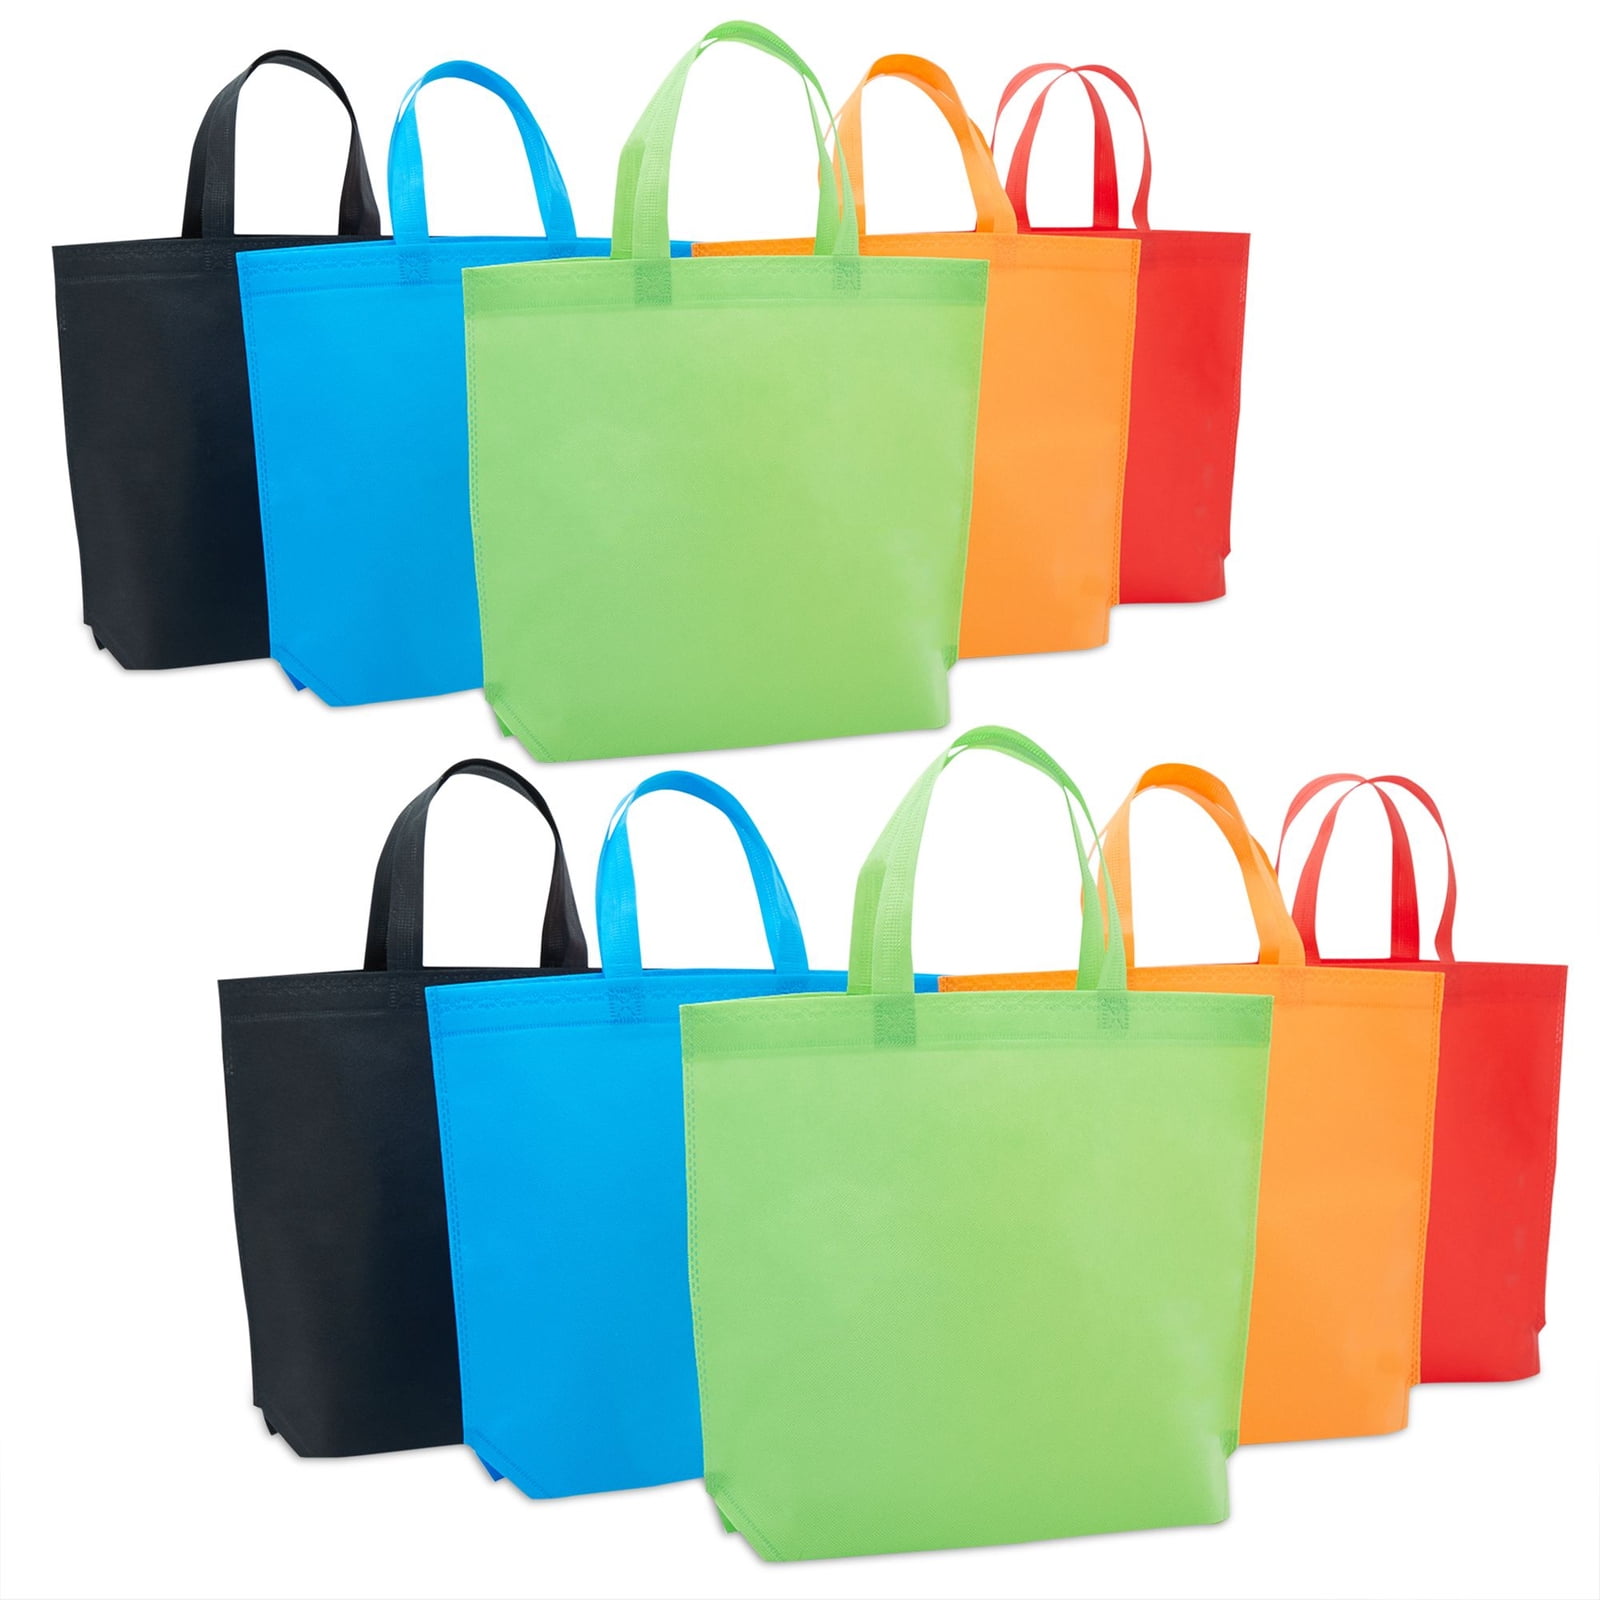 2 Durable Zipper Reusable Eco Bags for Shopping Groceries Storage Laundry Travel 